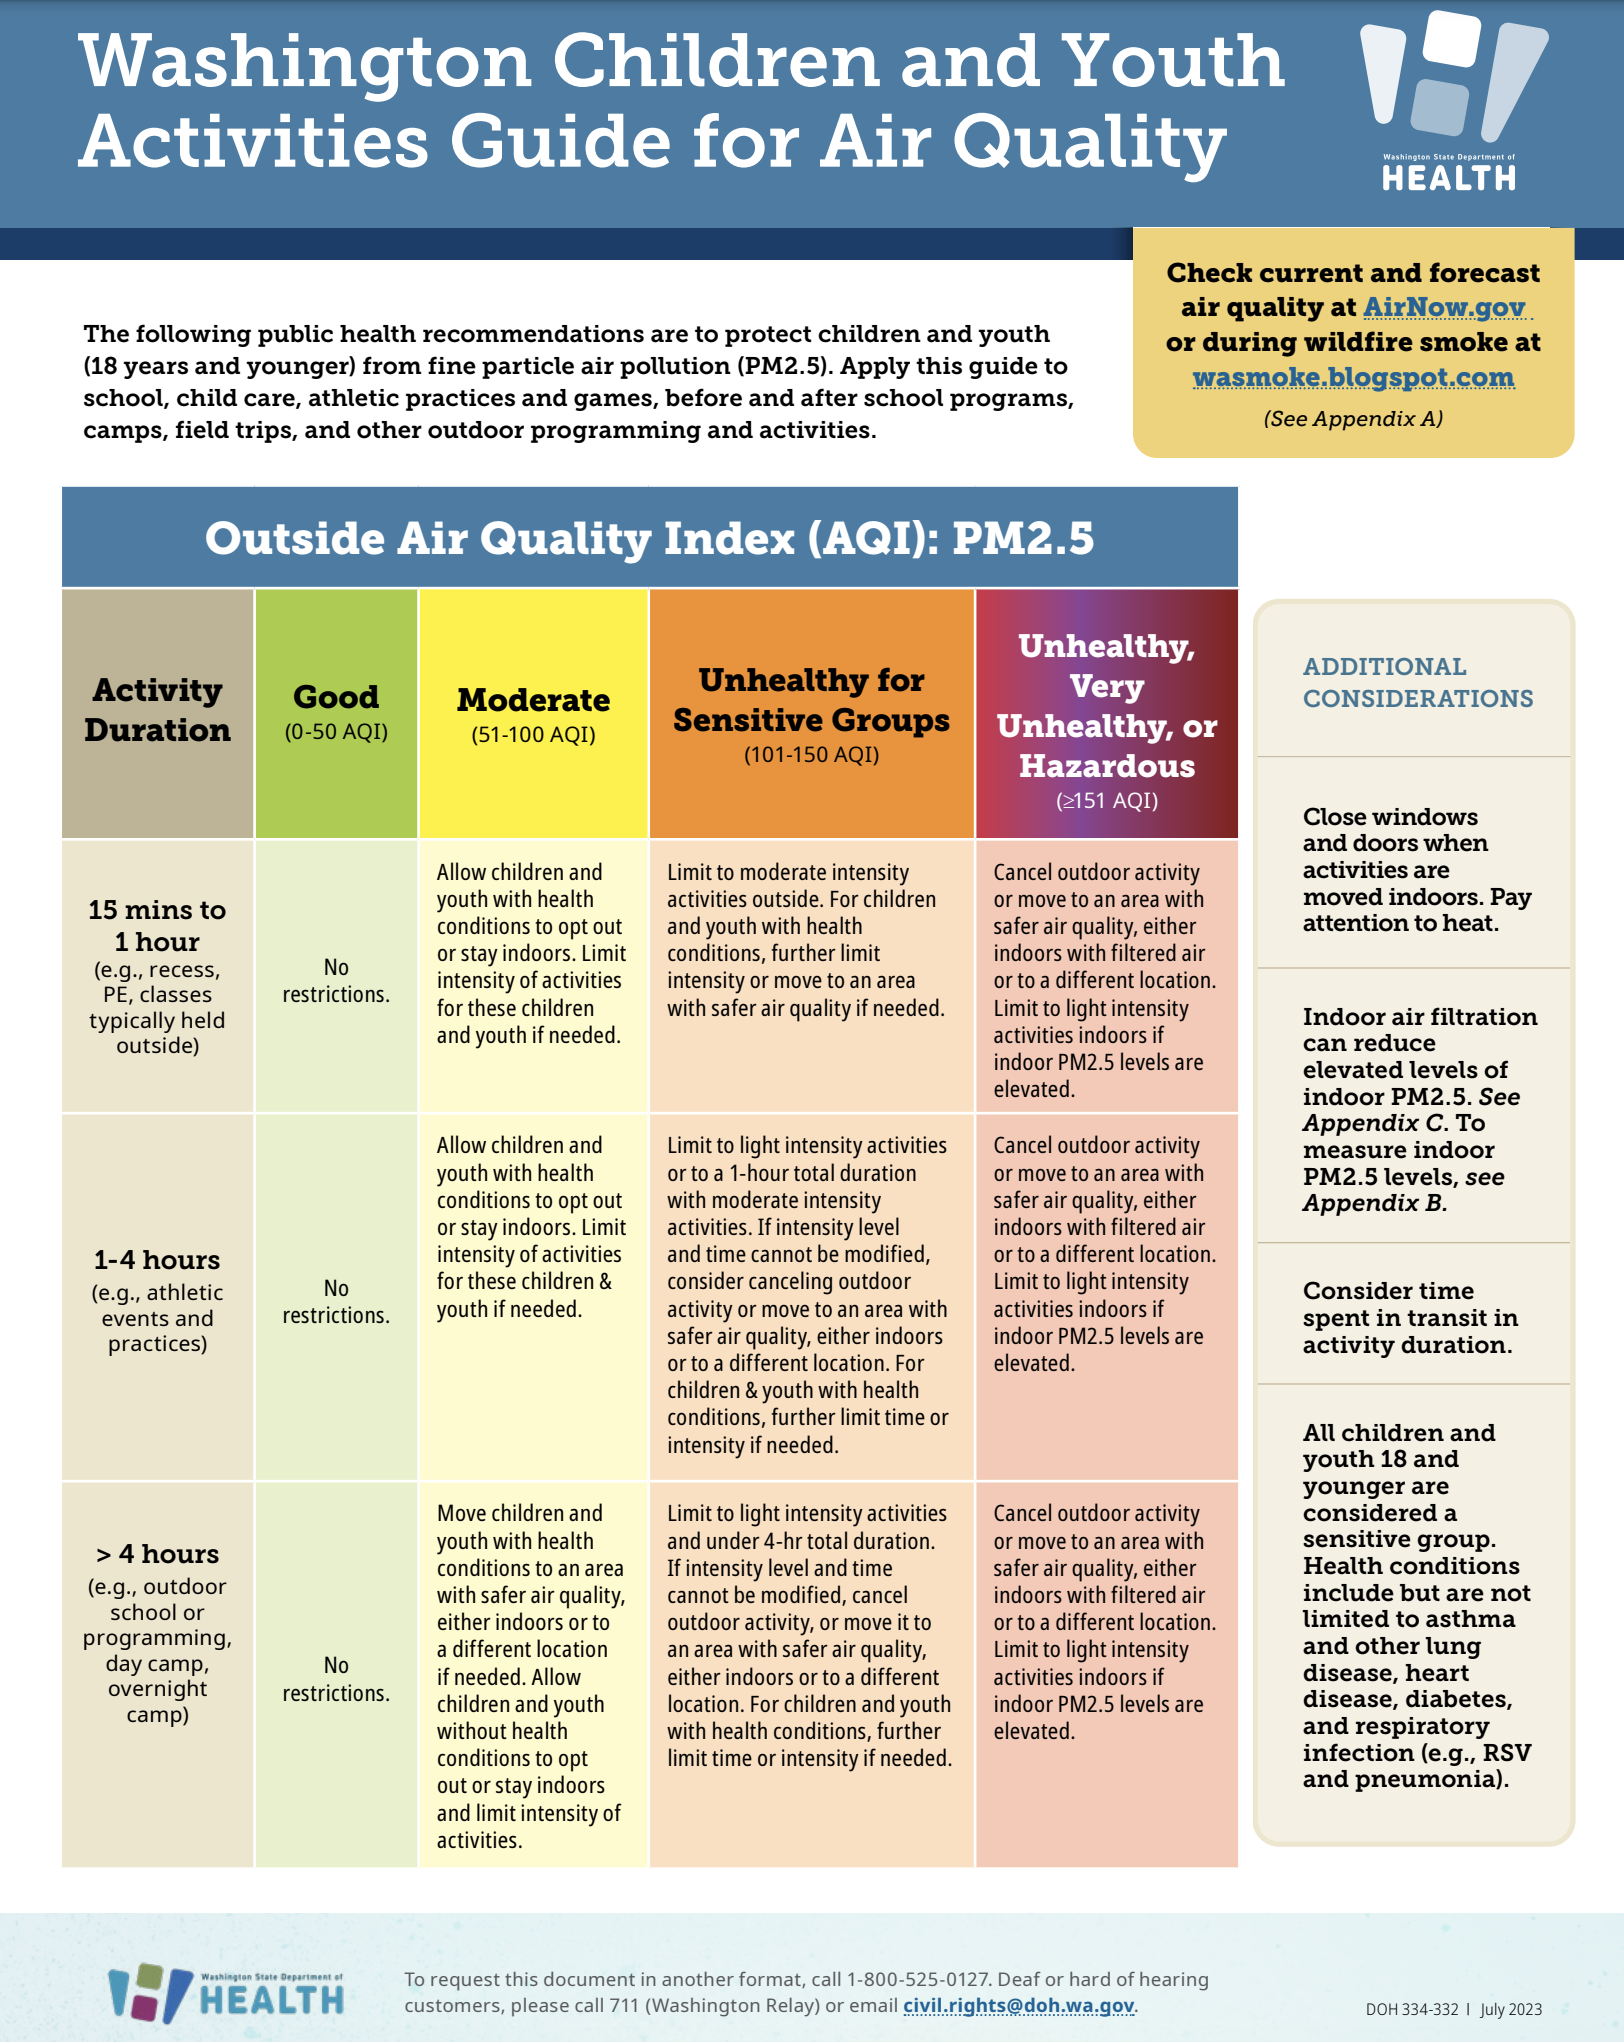 Washington Children and Youth Activities Guide for Air Quality